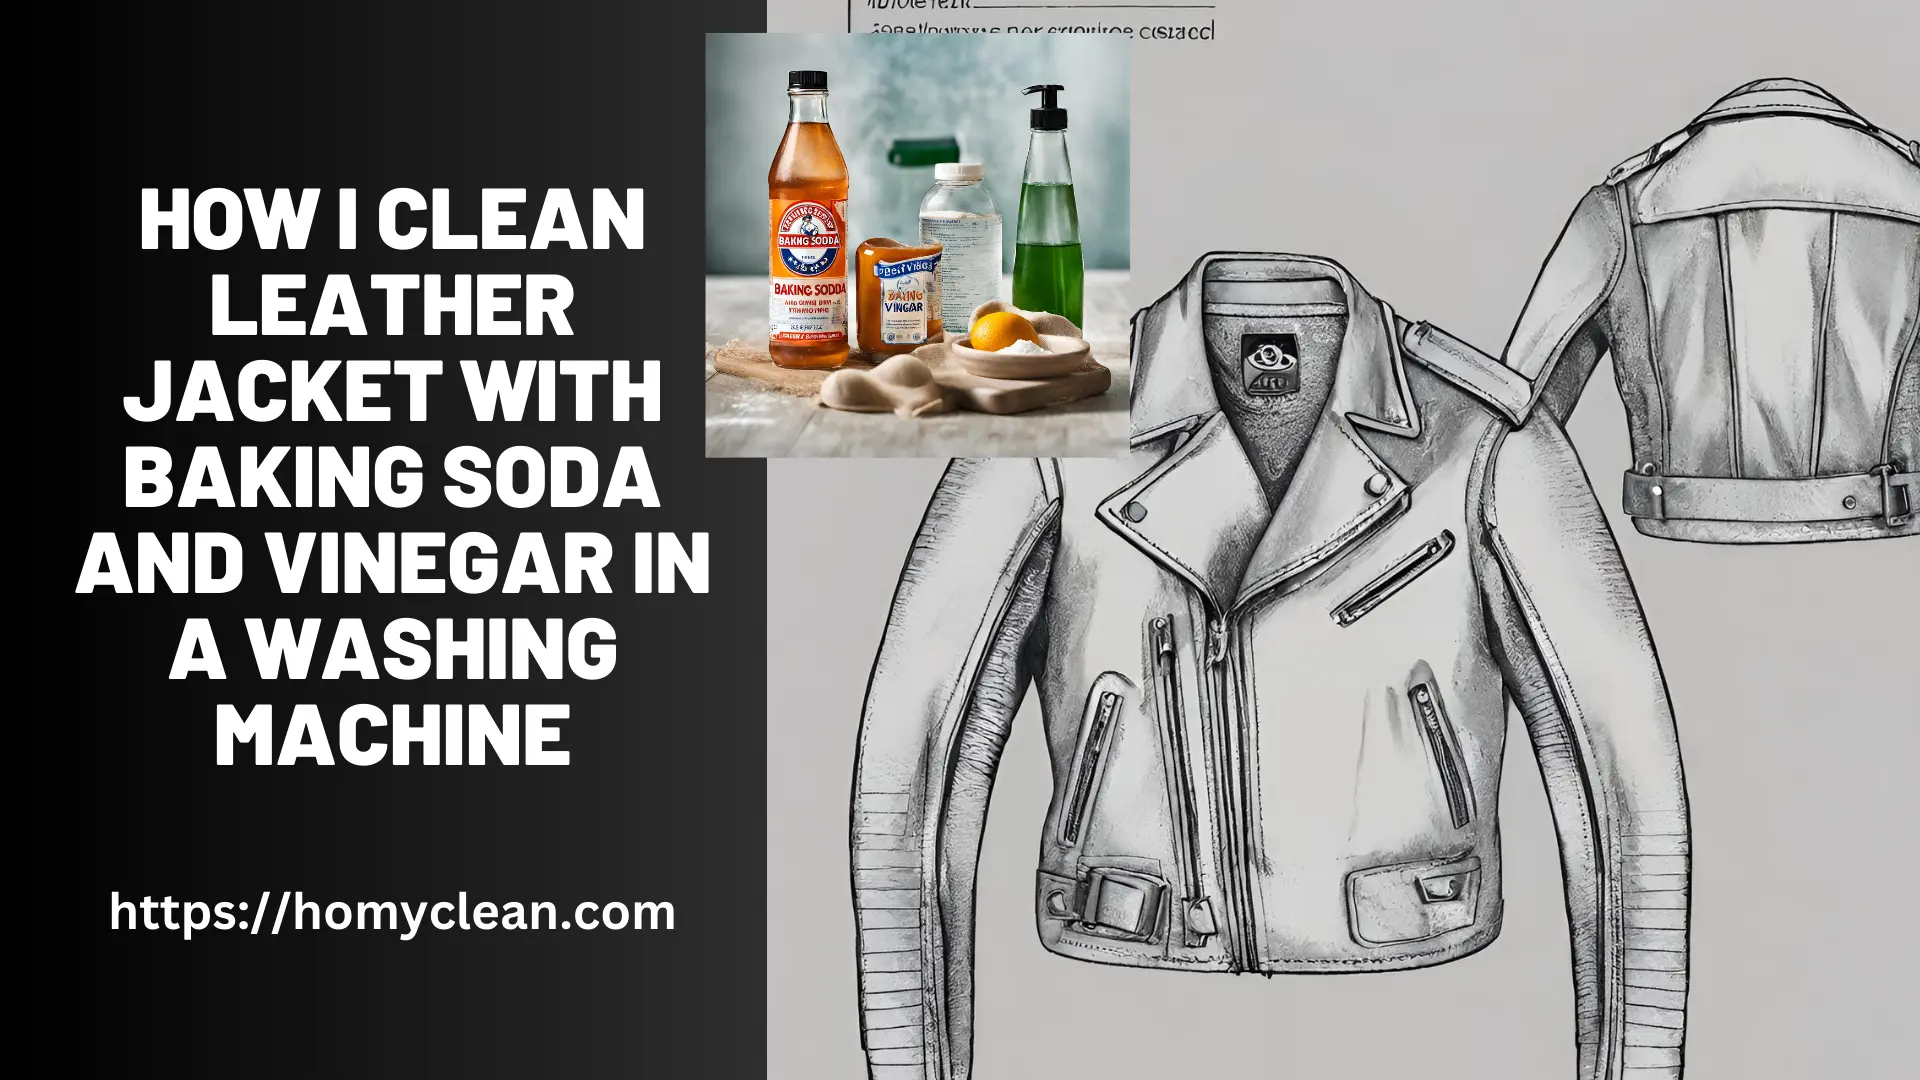 How I Clean Leather Jacket with Baking Soda and Vinegar in a Washing Machine